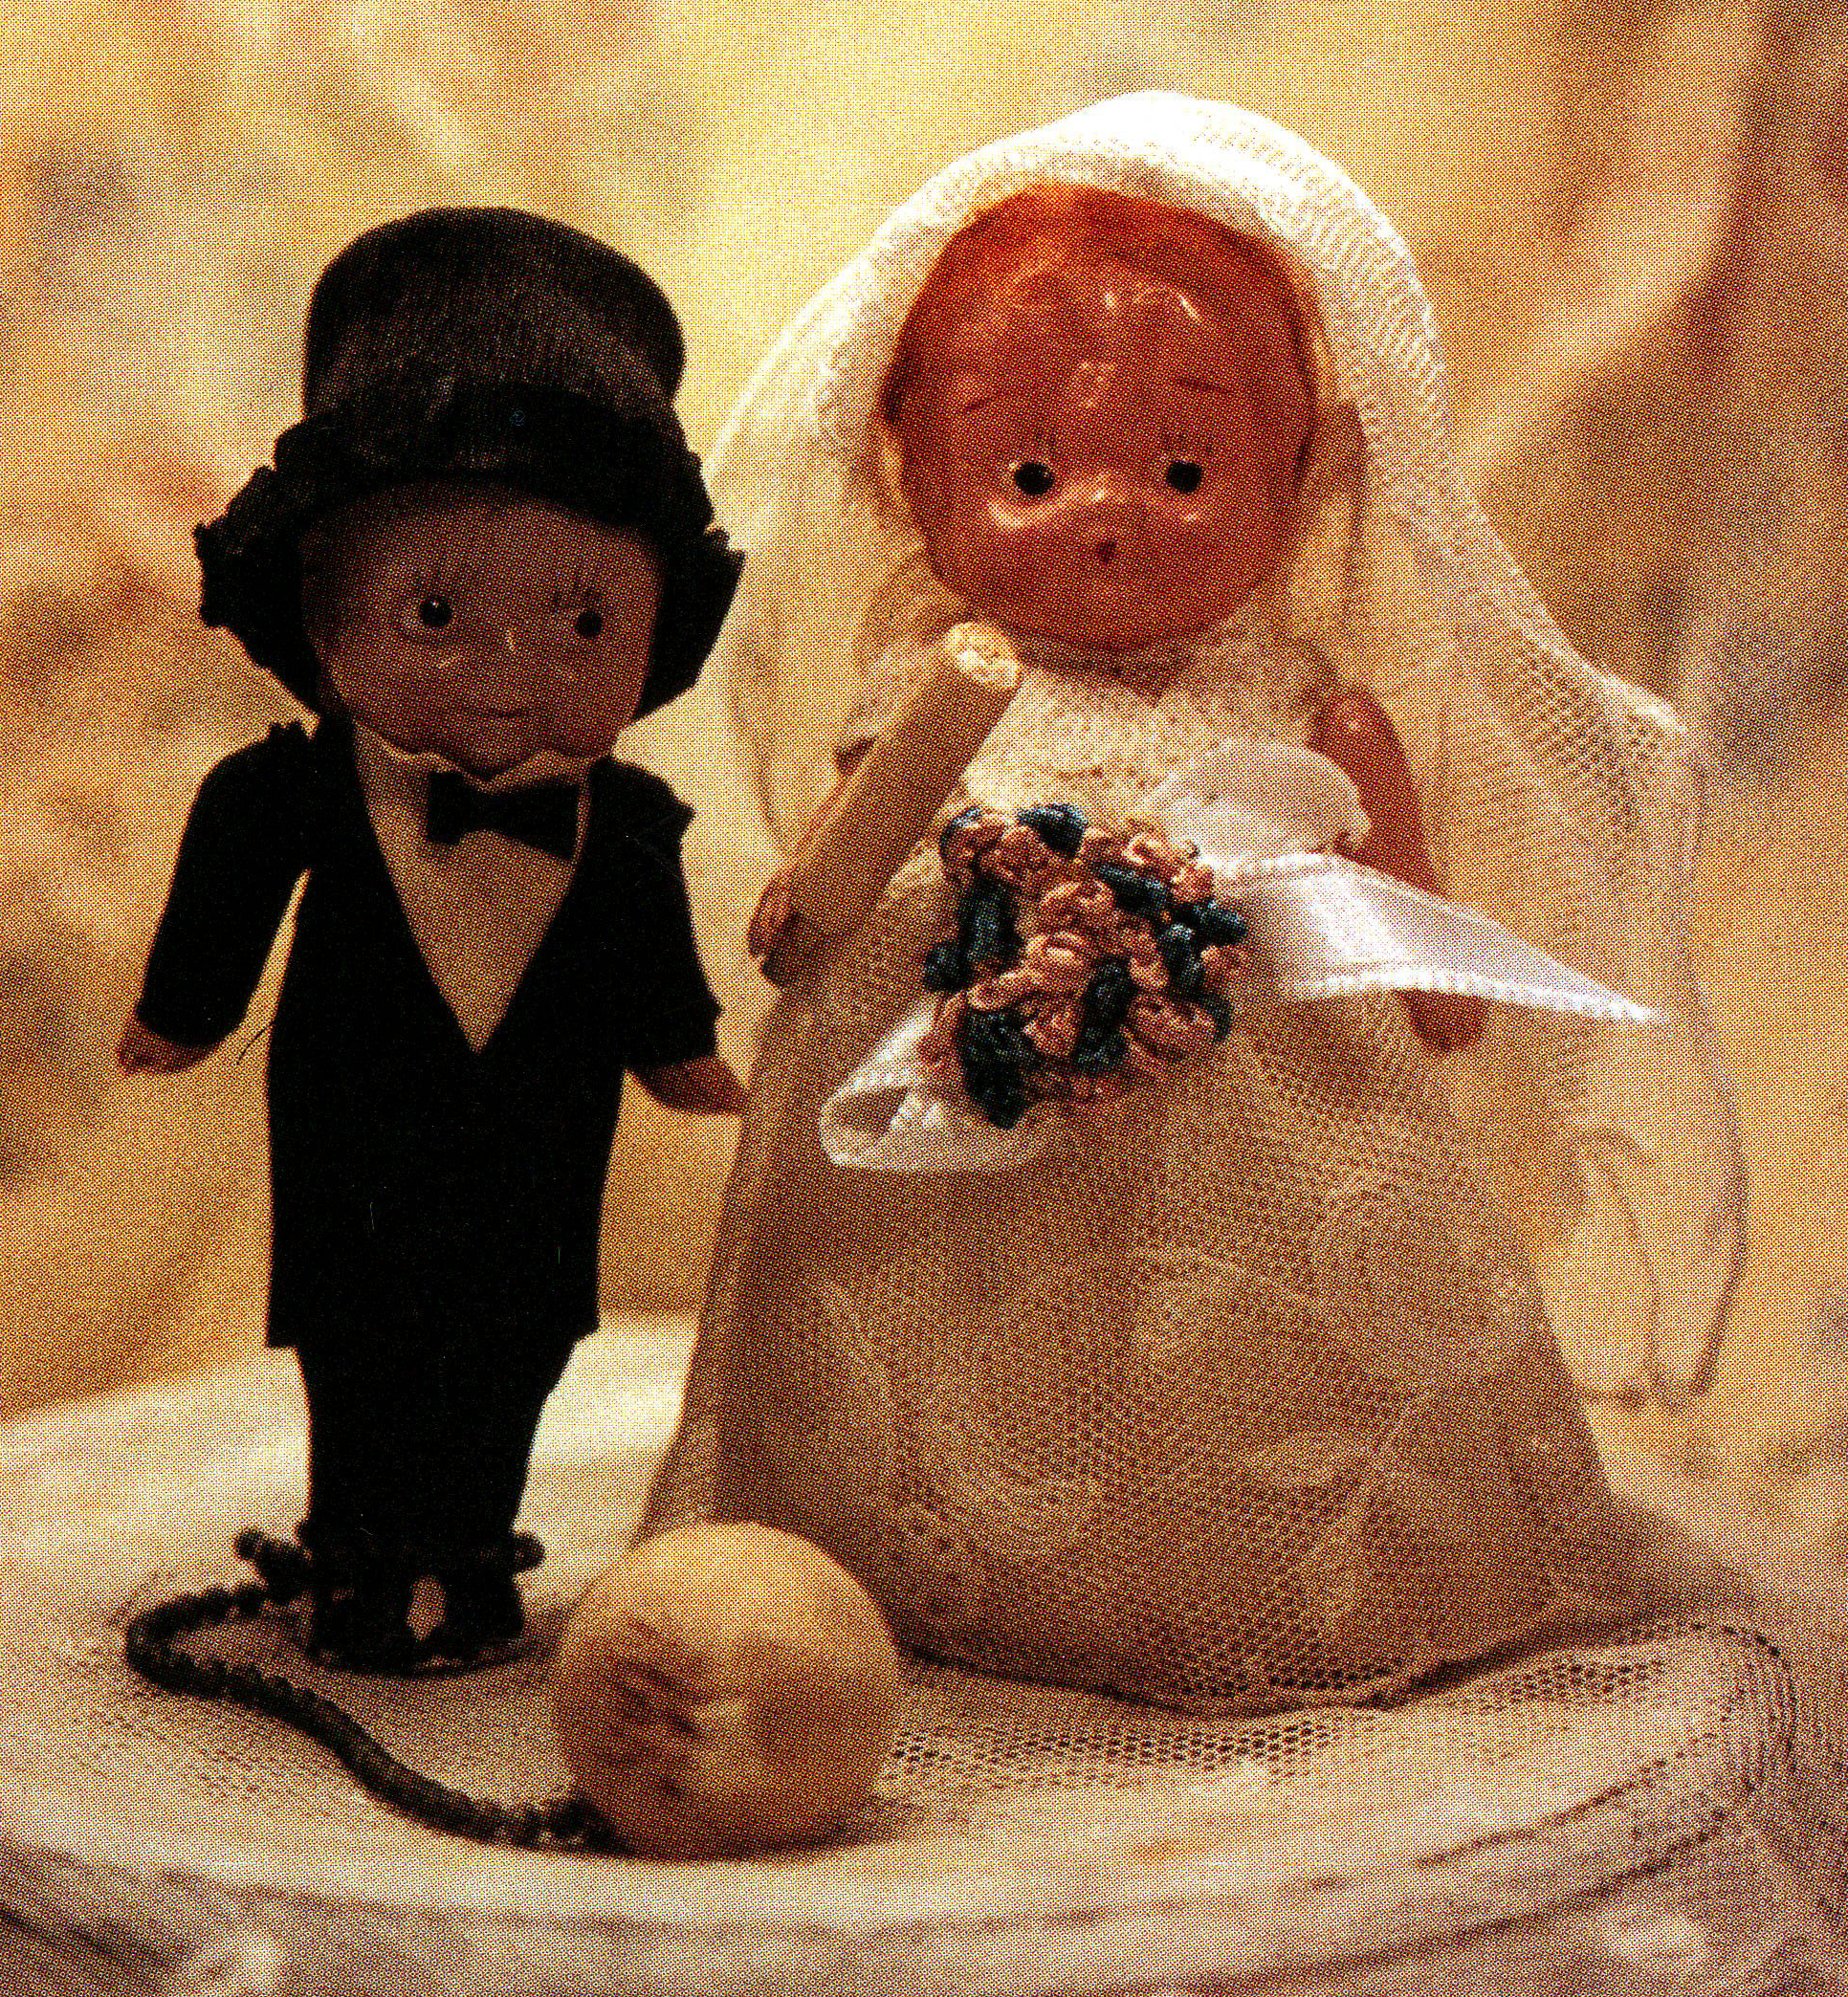 Childlike dolls. The groom doll wears a chain around his ankle leading to a big white cement-like ball.